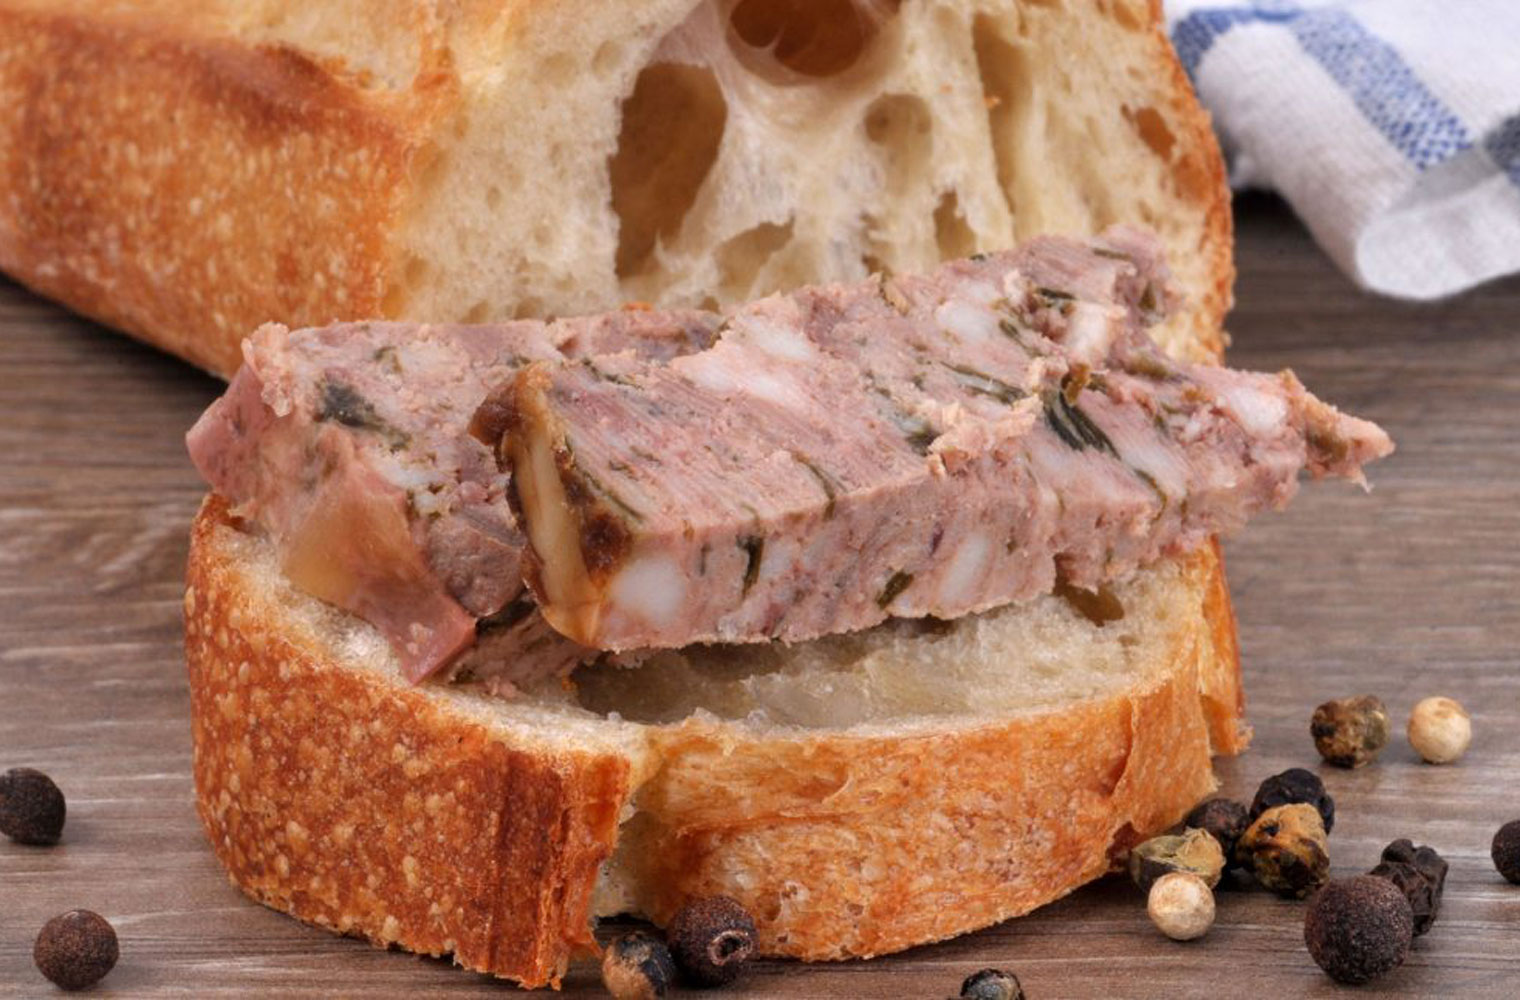 🍴 If You’ve Tried 18/27 of These Foods, You’re a Sophisticated Eater Pâté